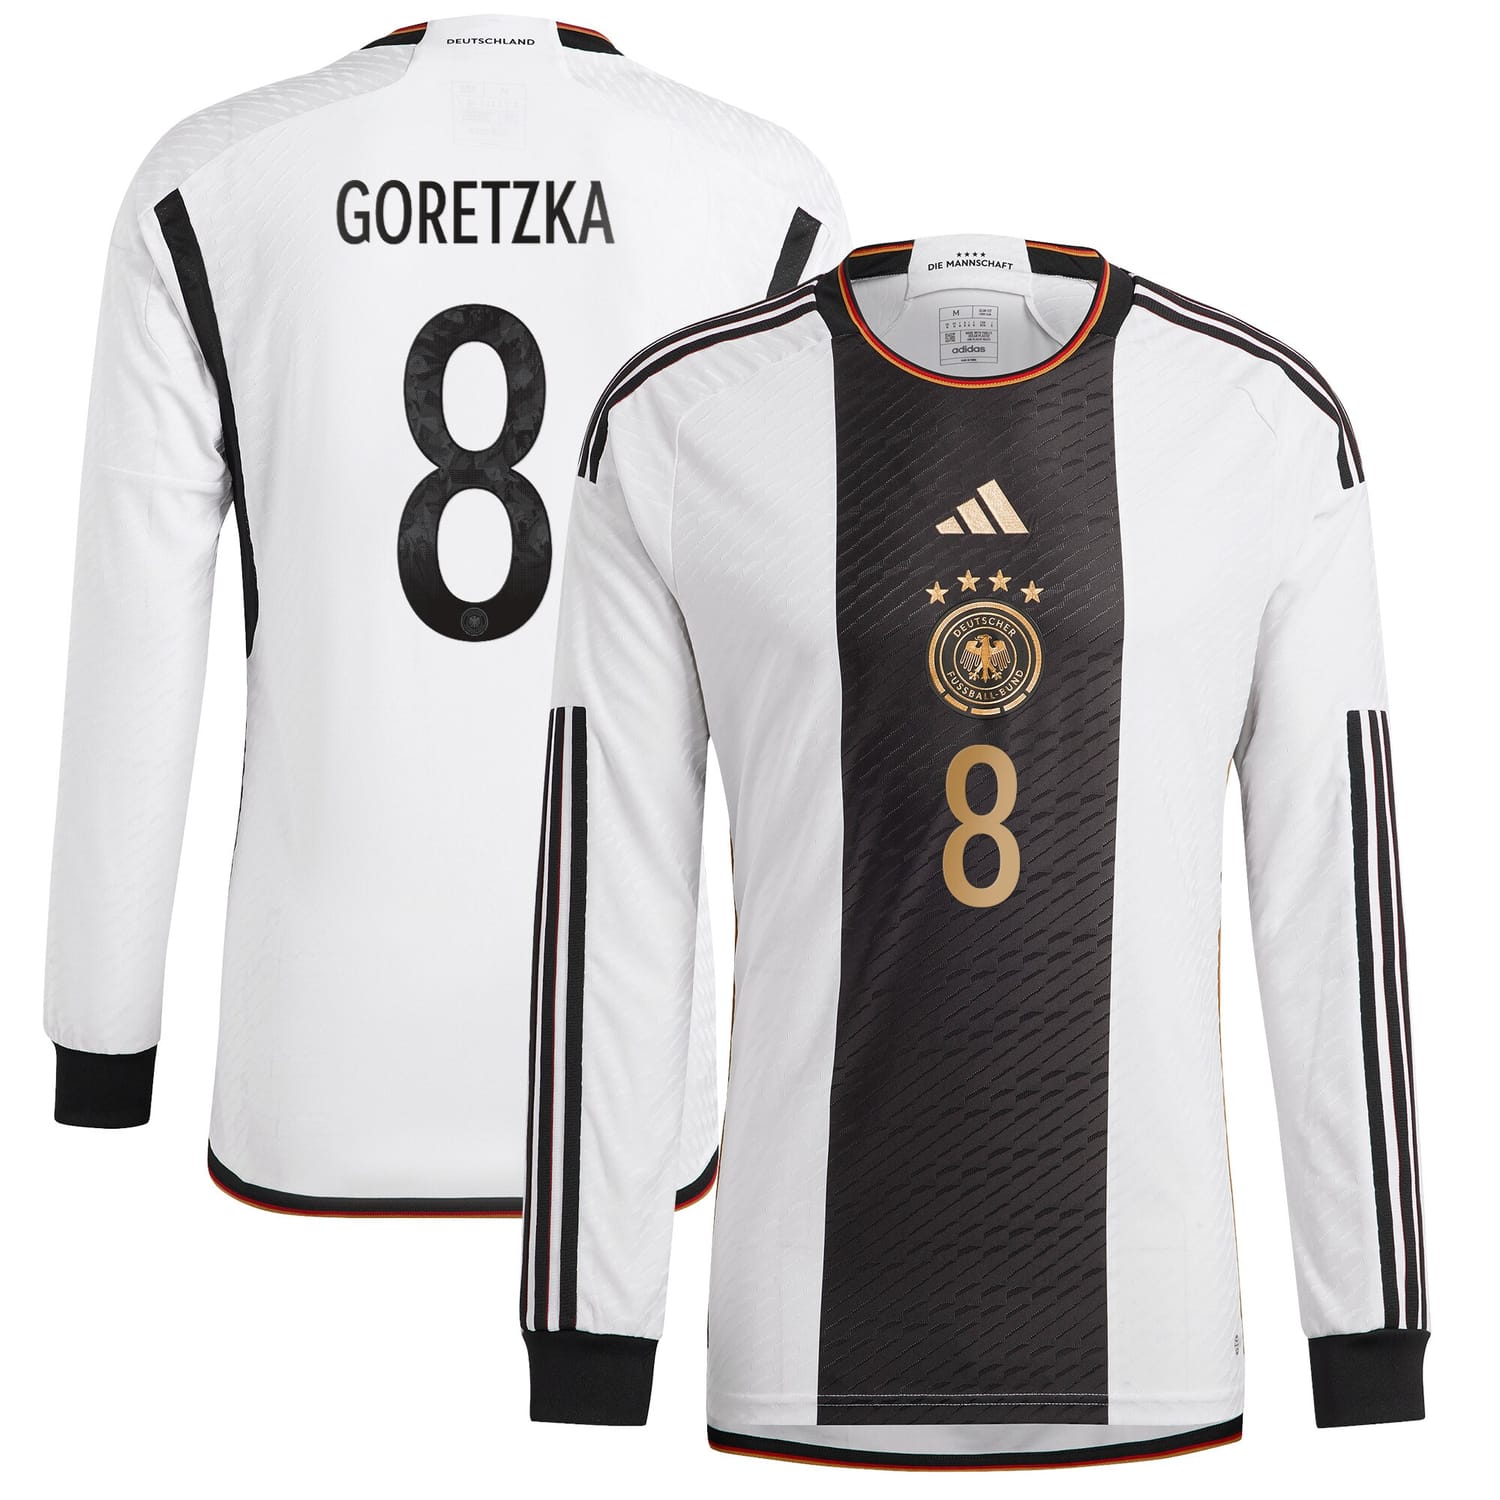 Germany National Team Home Authentic Jersey Shirt Long Sleeve player Leon Goretzka 8 printing for Men